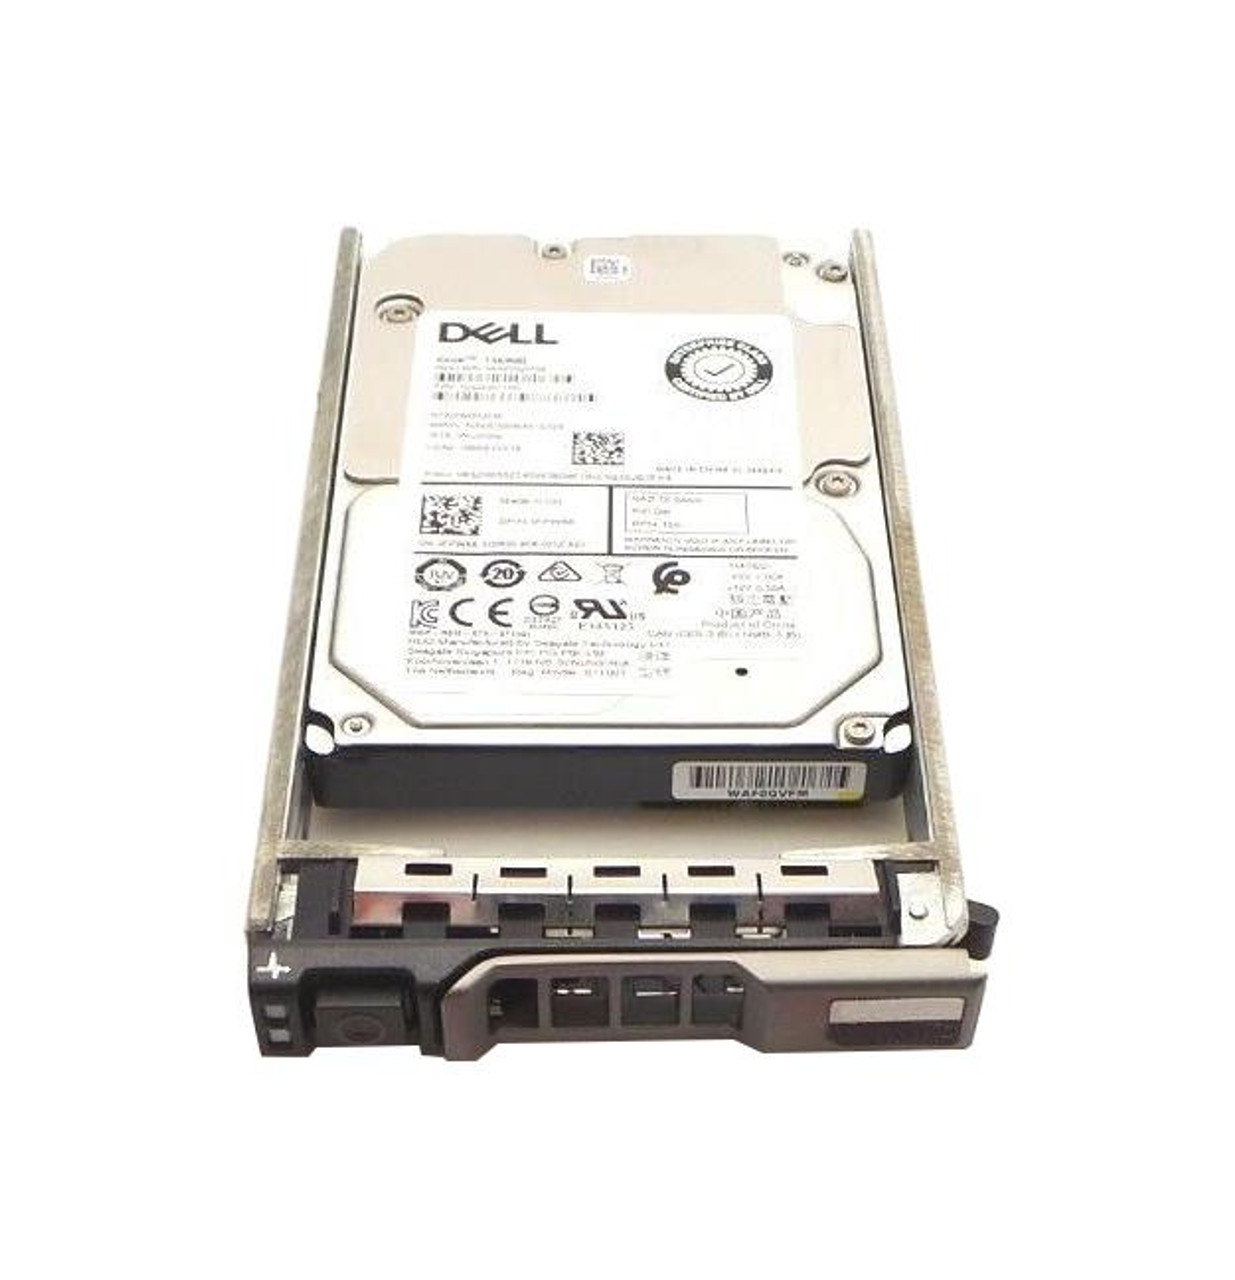 0C4NNP Dell 2TB 7200RPM SATA 6Gbps Hot Swap (512n) 2.5-inch Internal Hard Drive with Tray